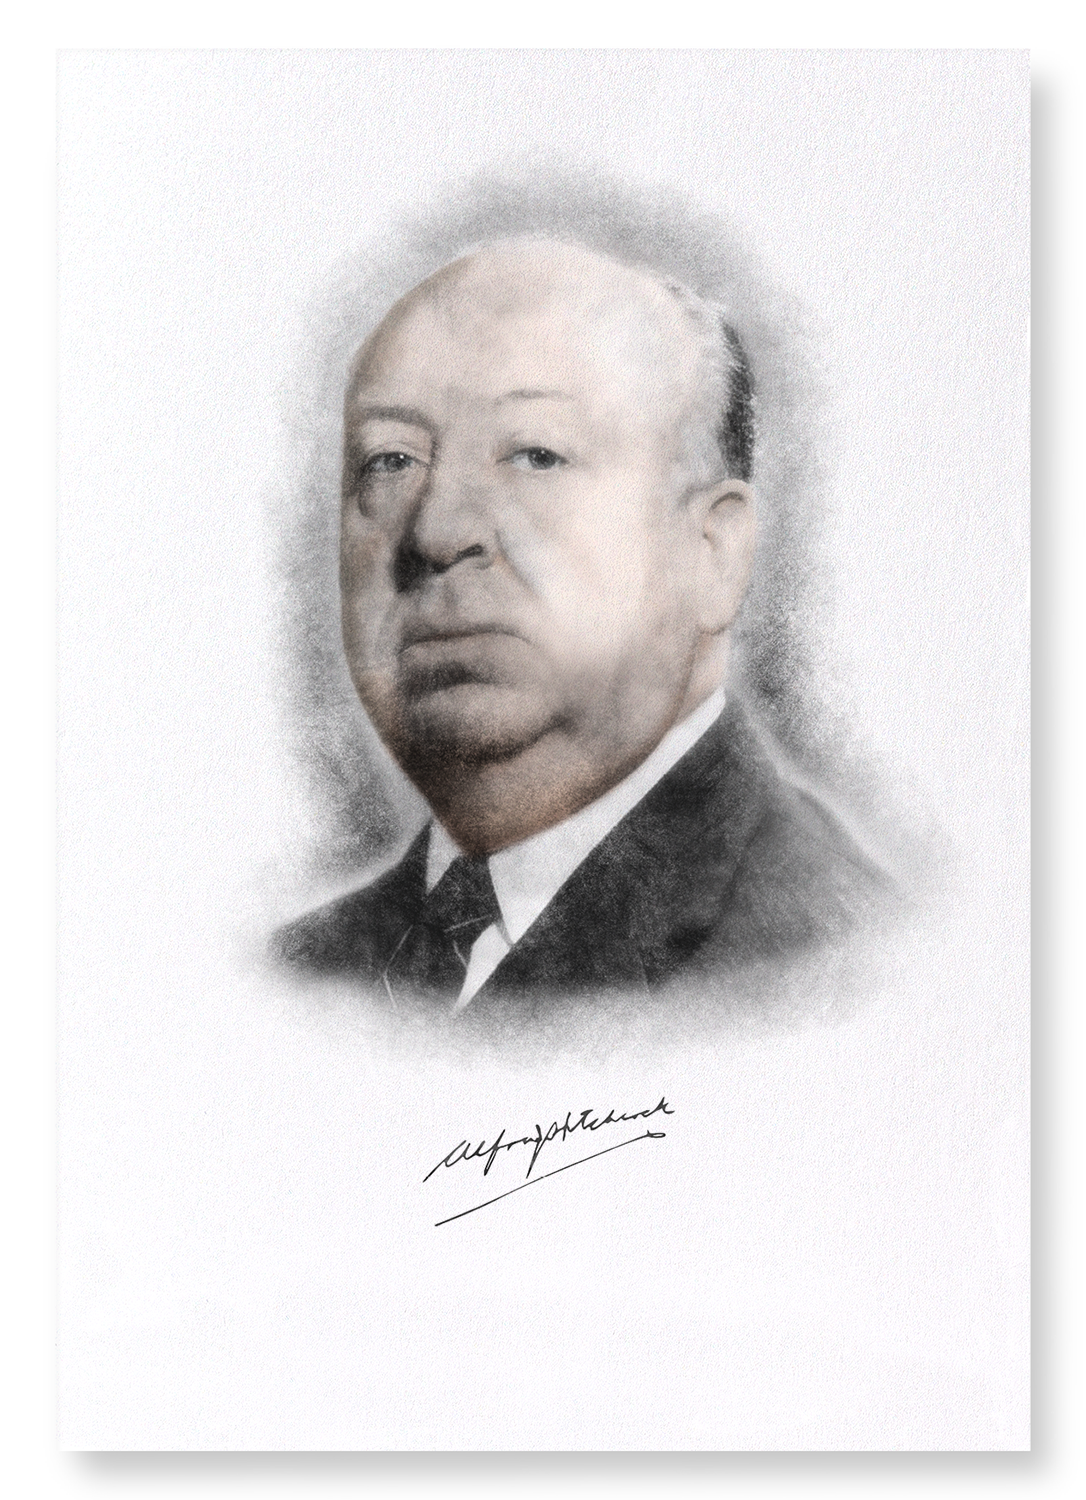 ALFRED HITCHCOCK (1899-1980)